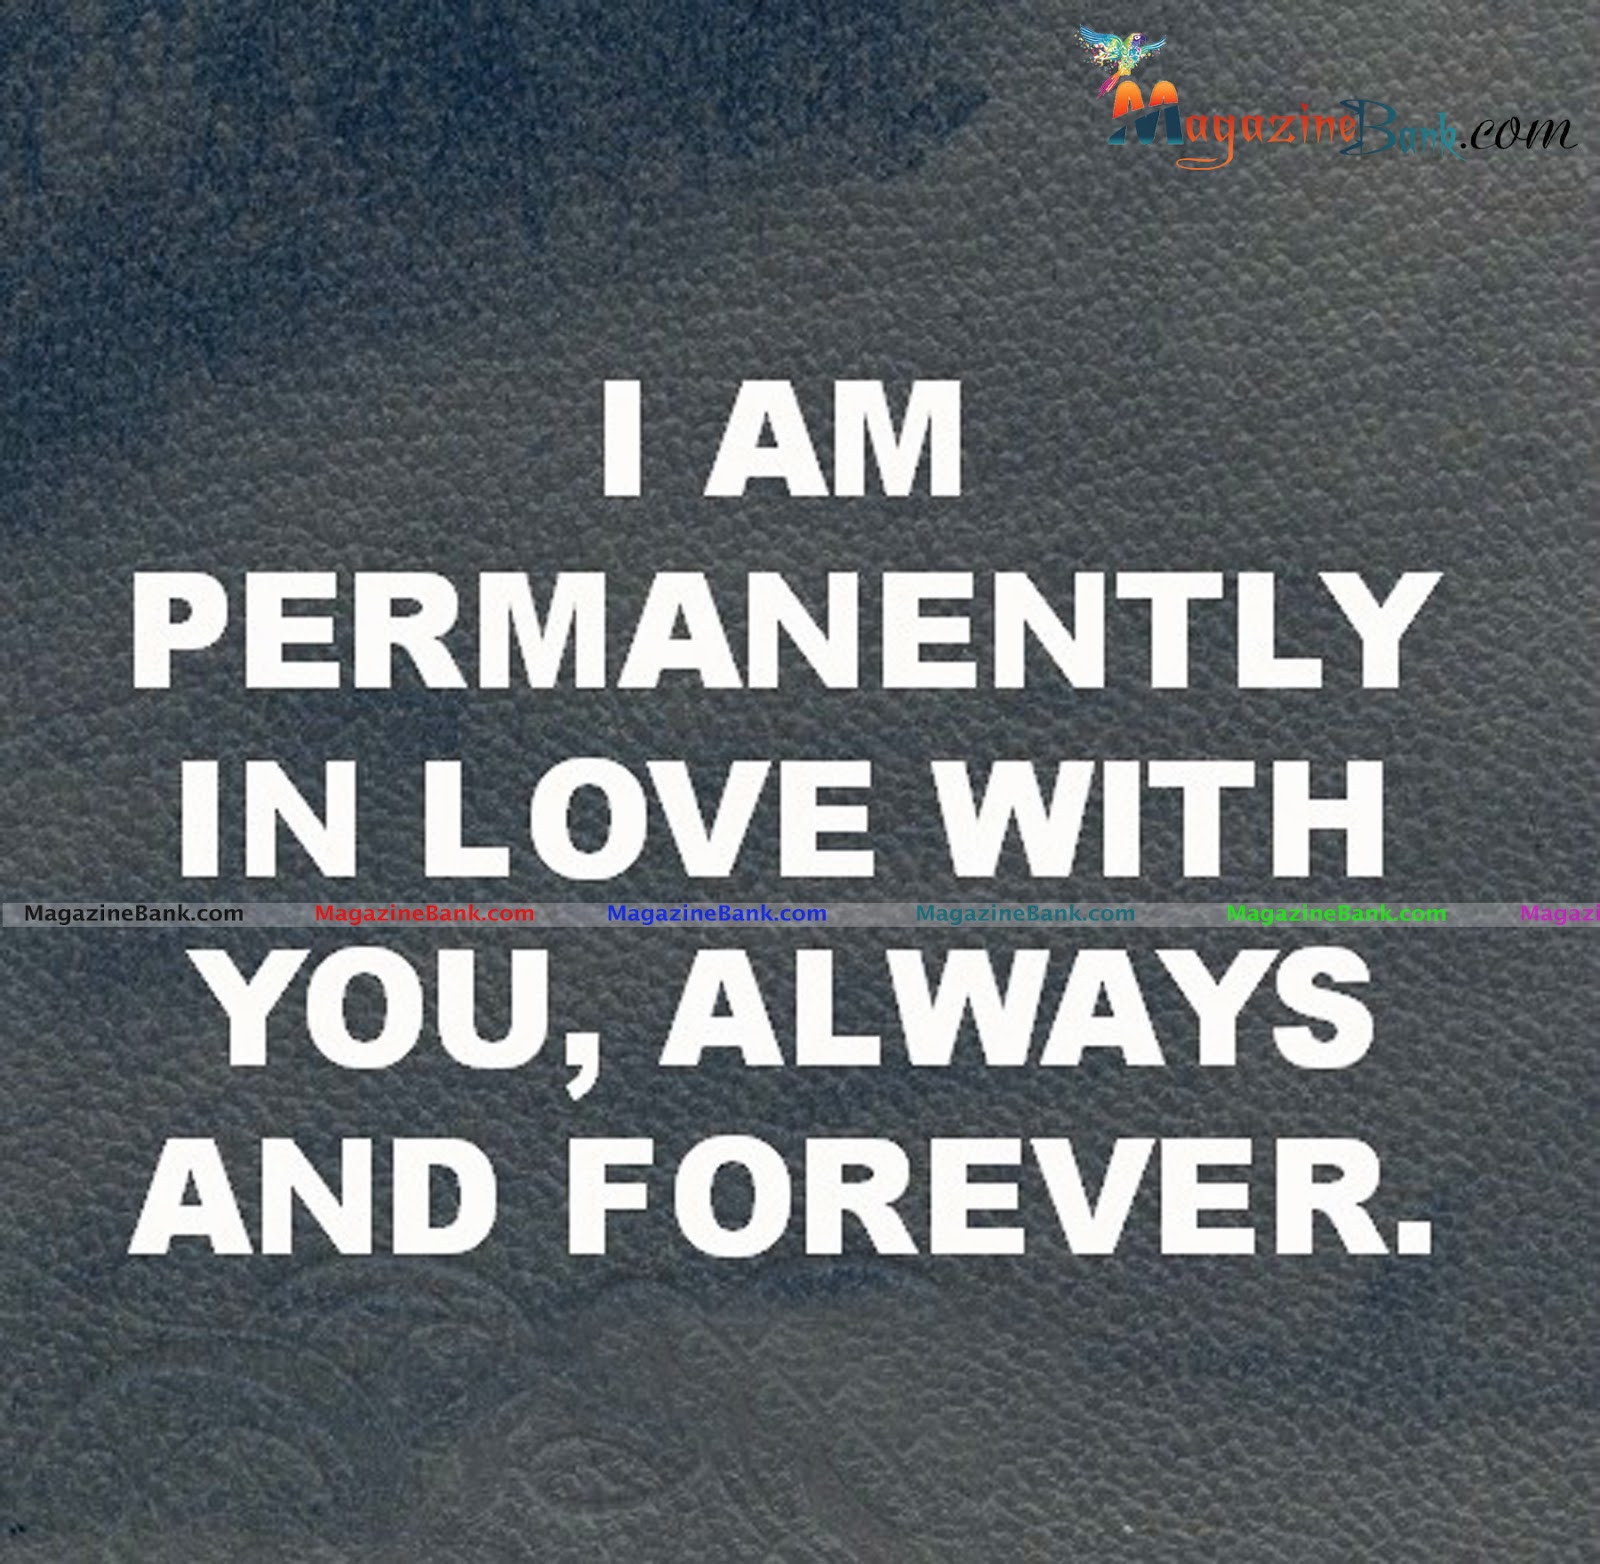 I Love You Forever Quotes
 Cute Quotes Love You Forever QuotesGram